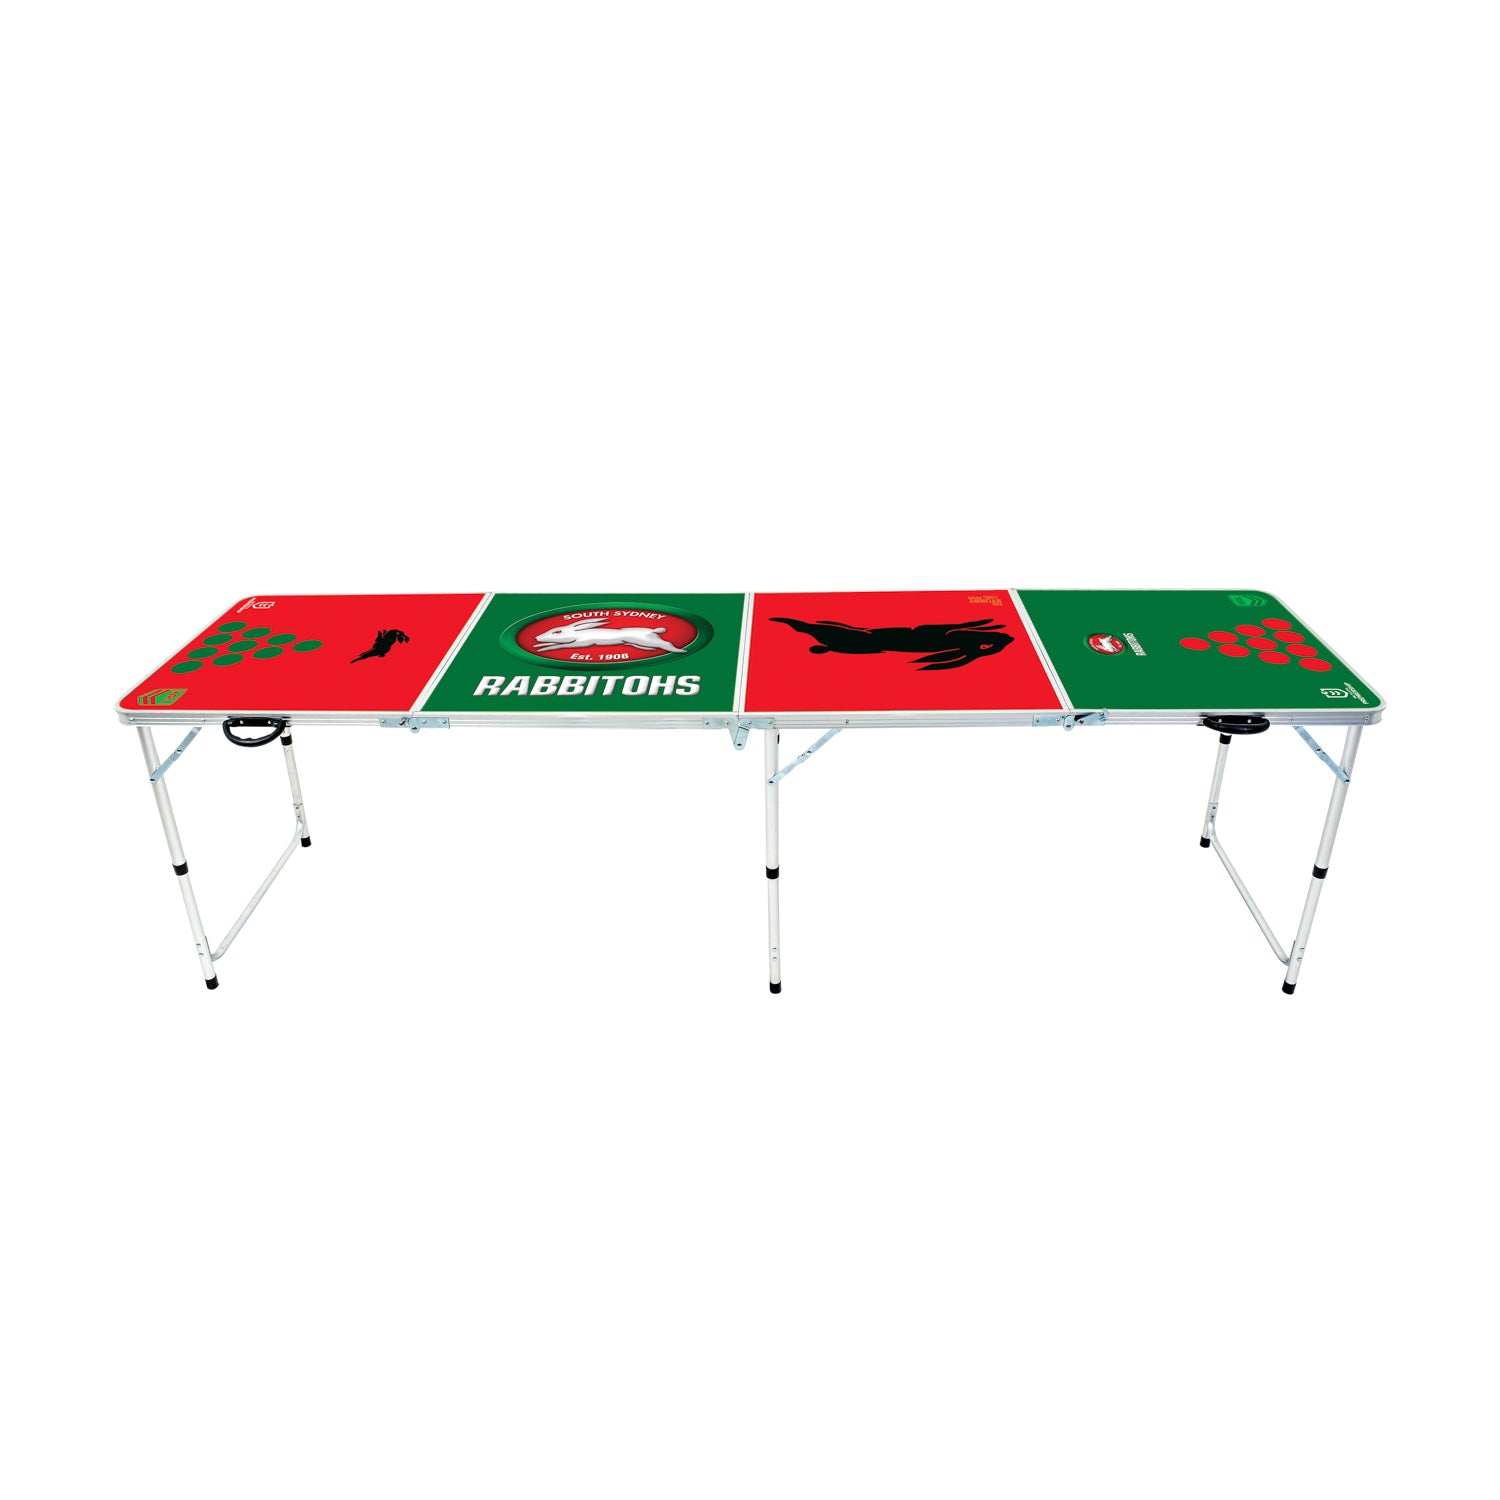 South Sydney Rabbitohs NRL Beer Pong Table